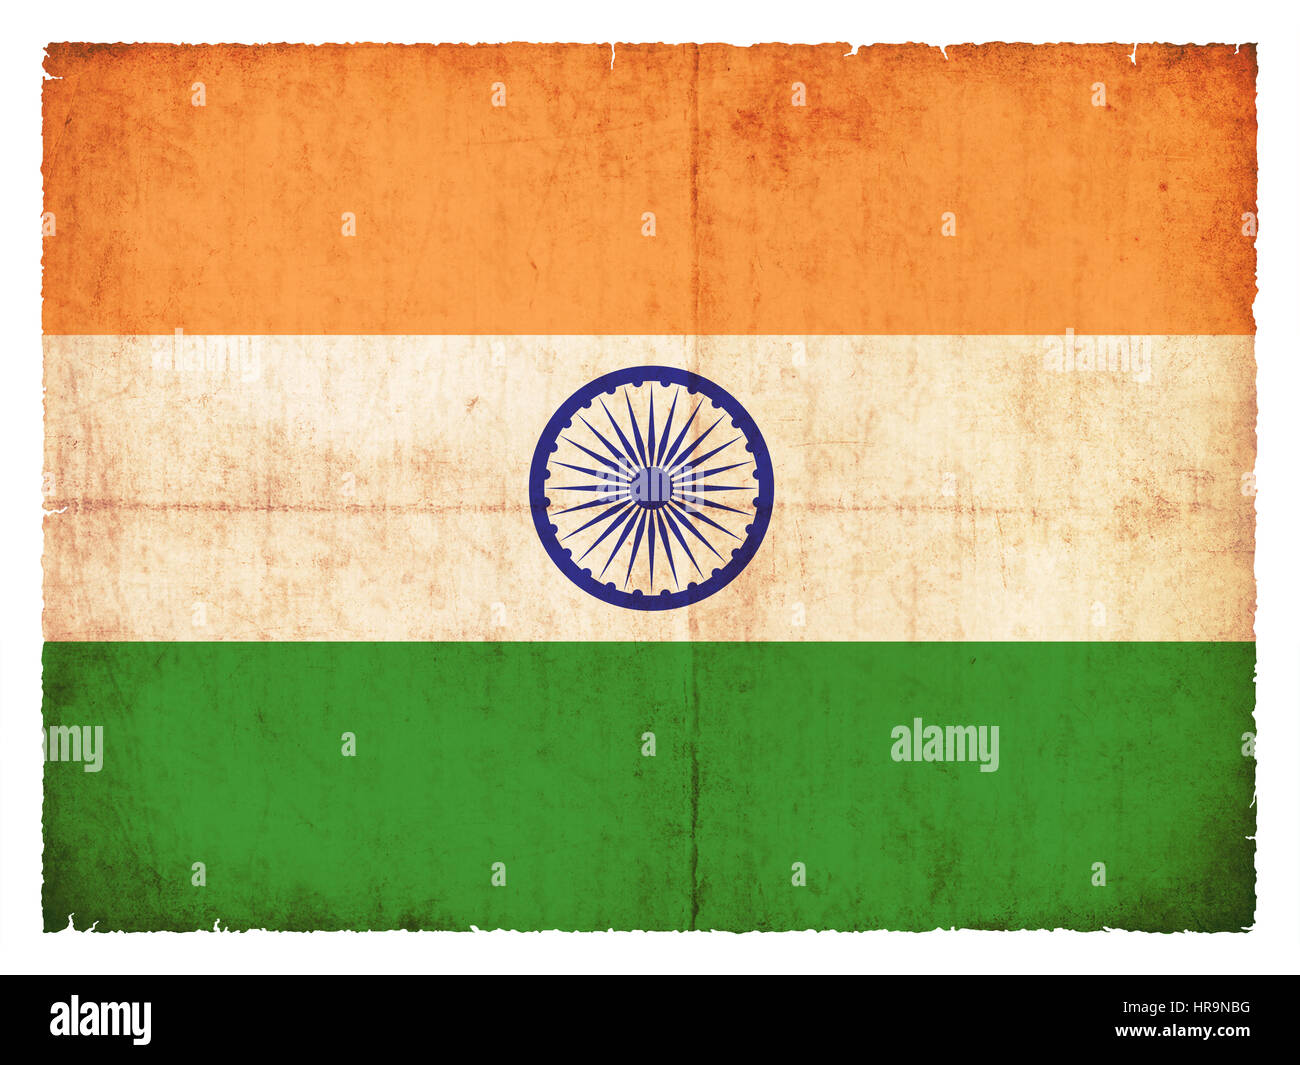 National Flag of India created in grunge style Stock Photo